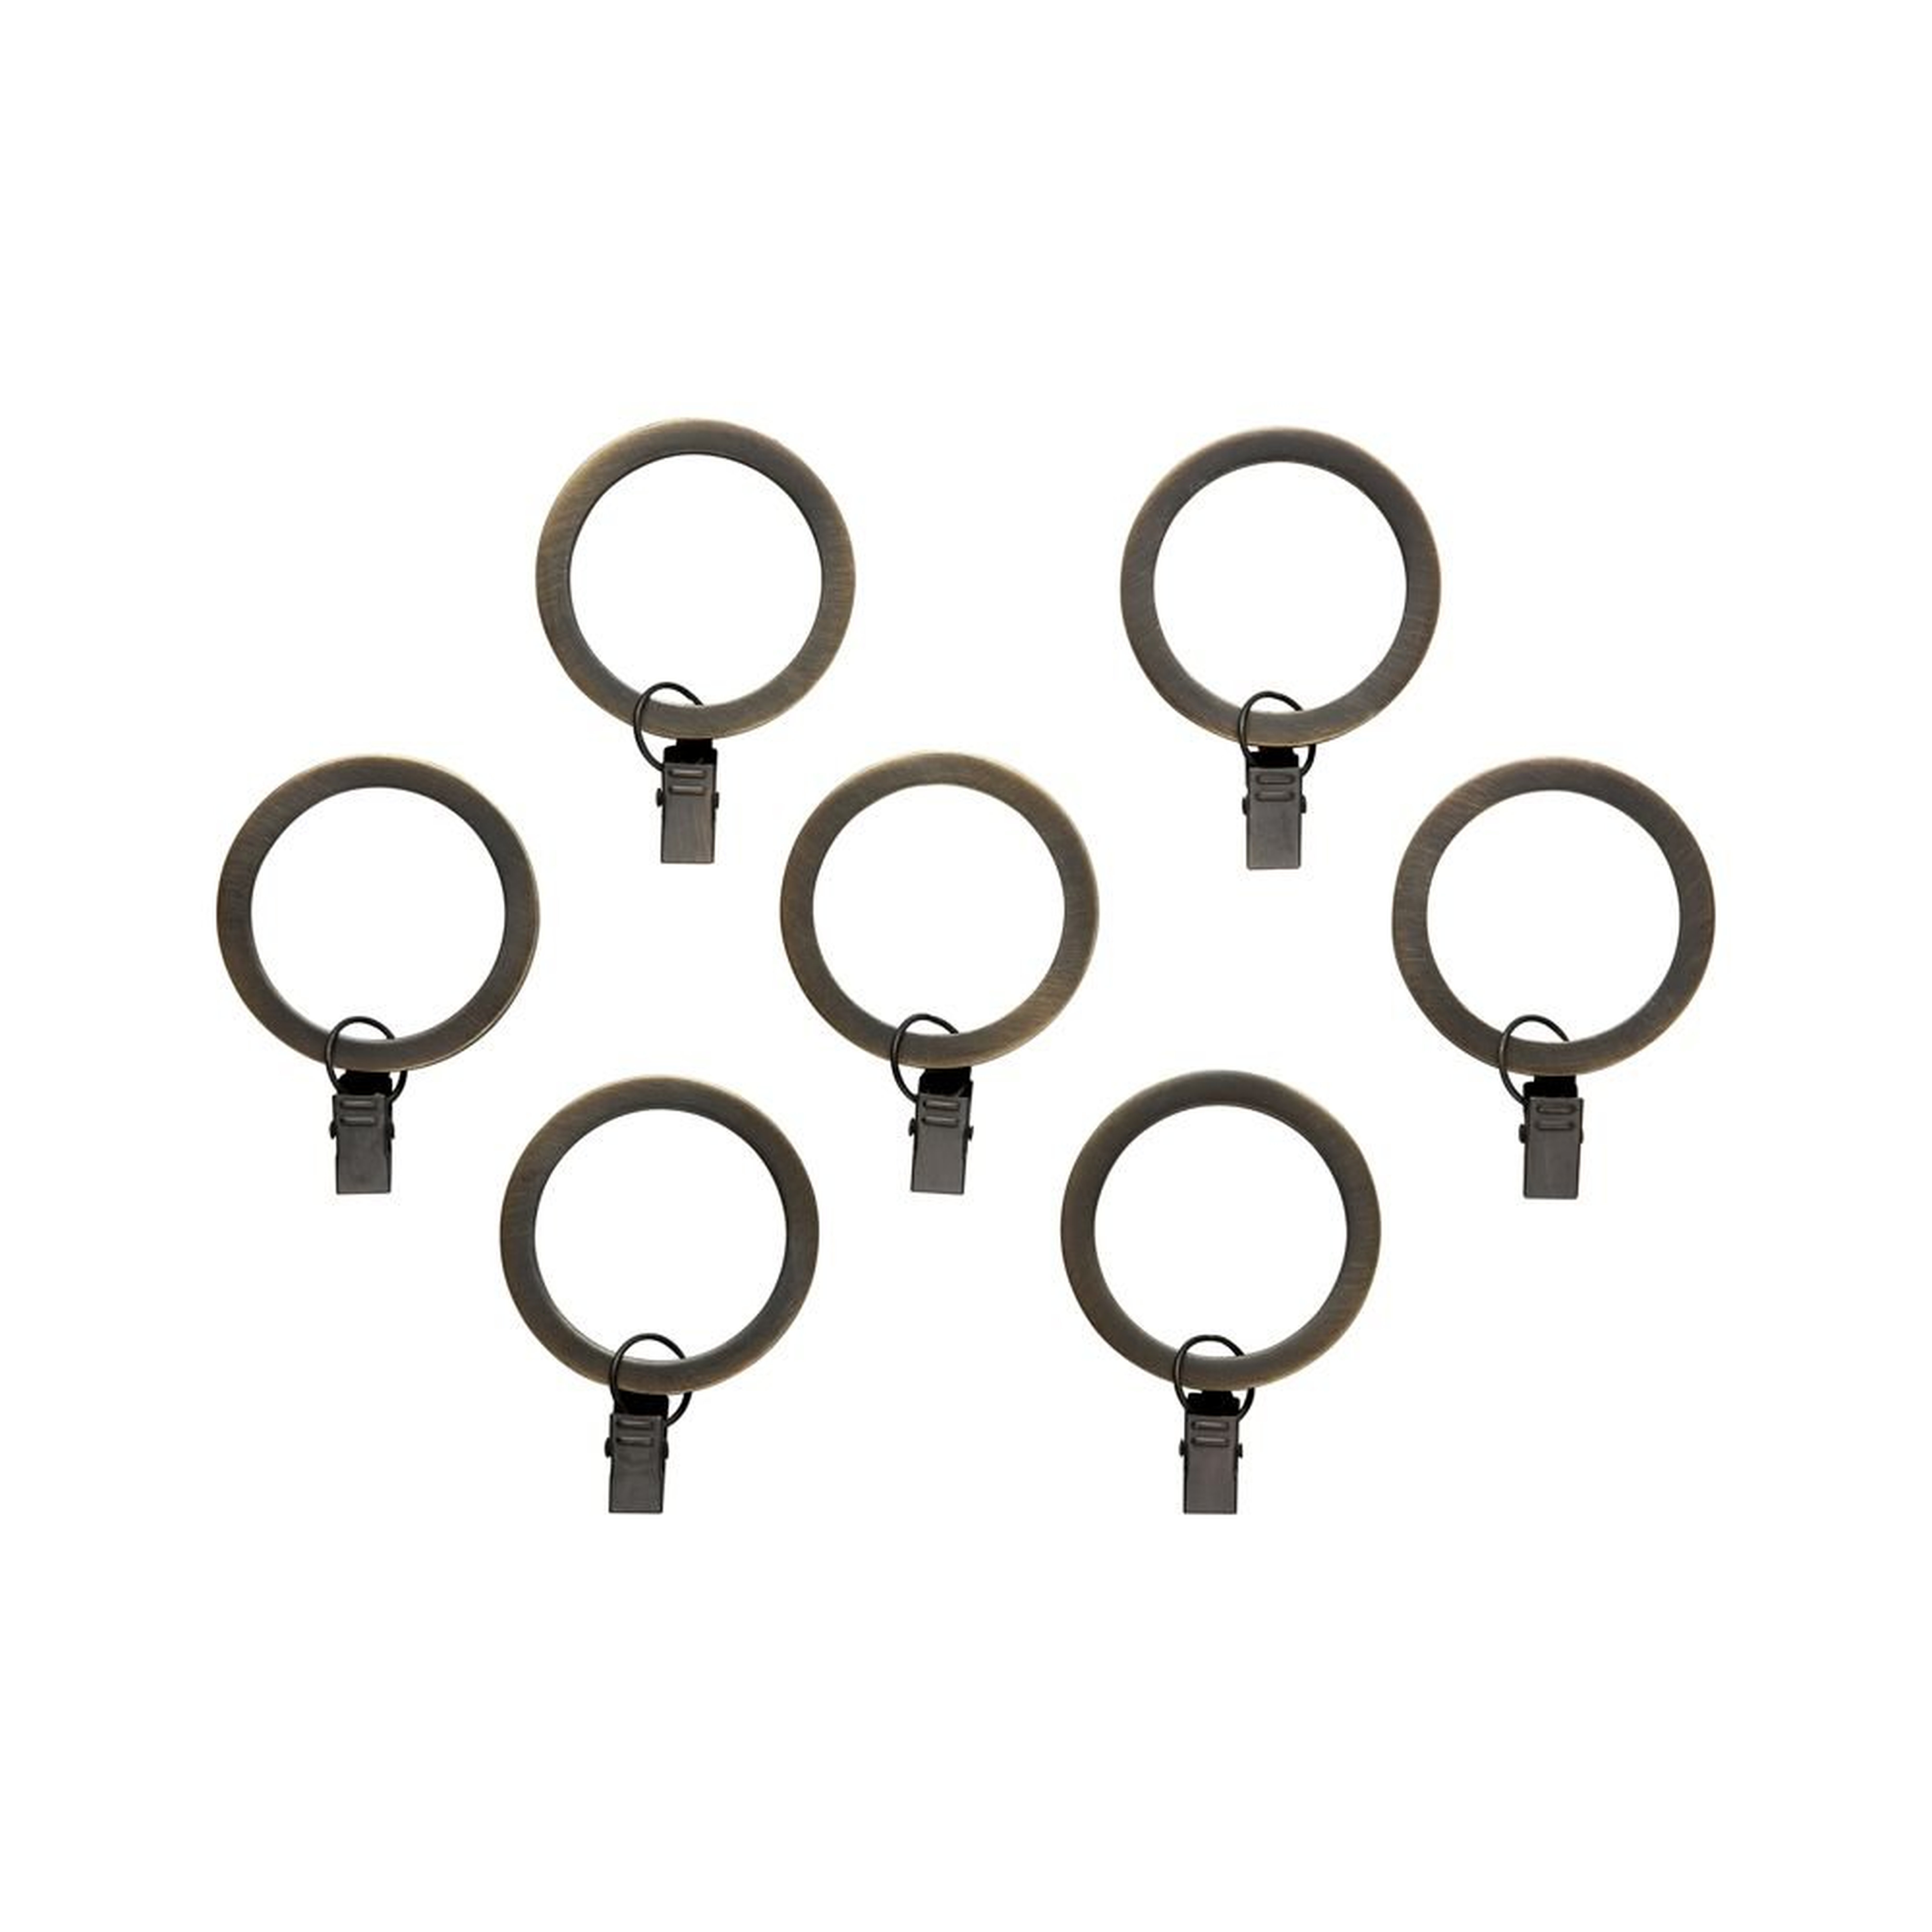 Set of 7 Bronze Curtain Rings - Crate and Barrel